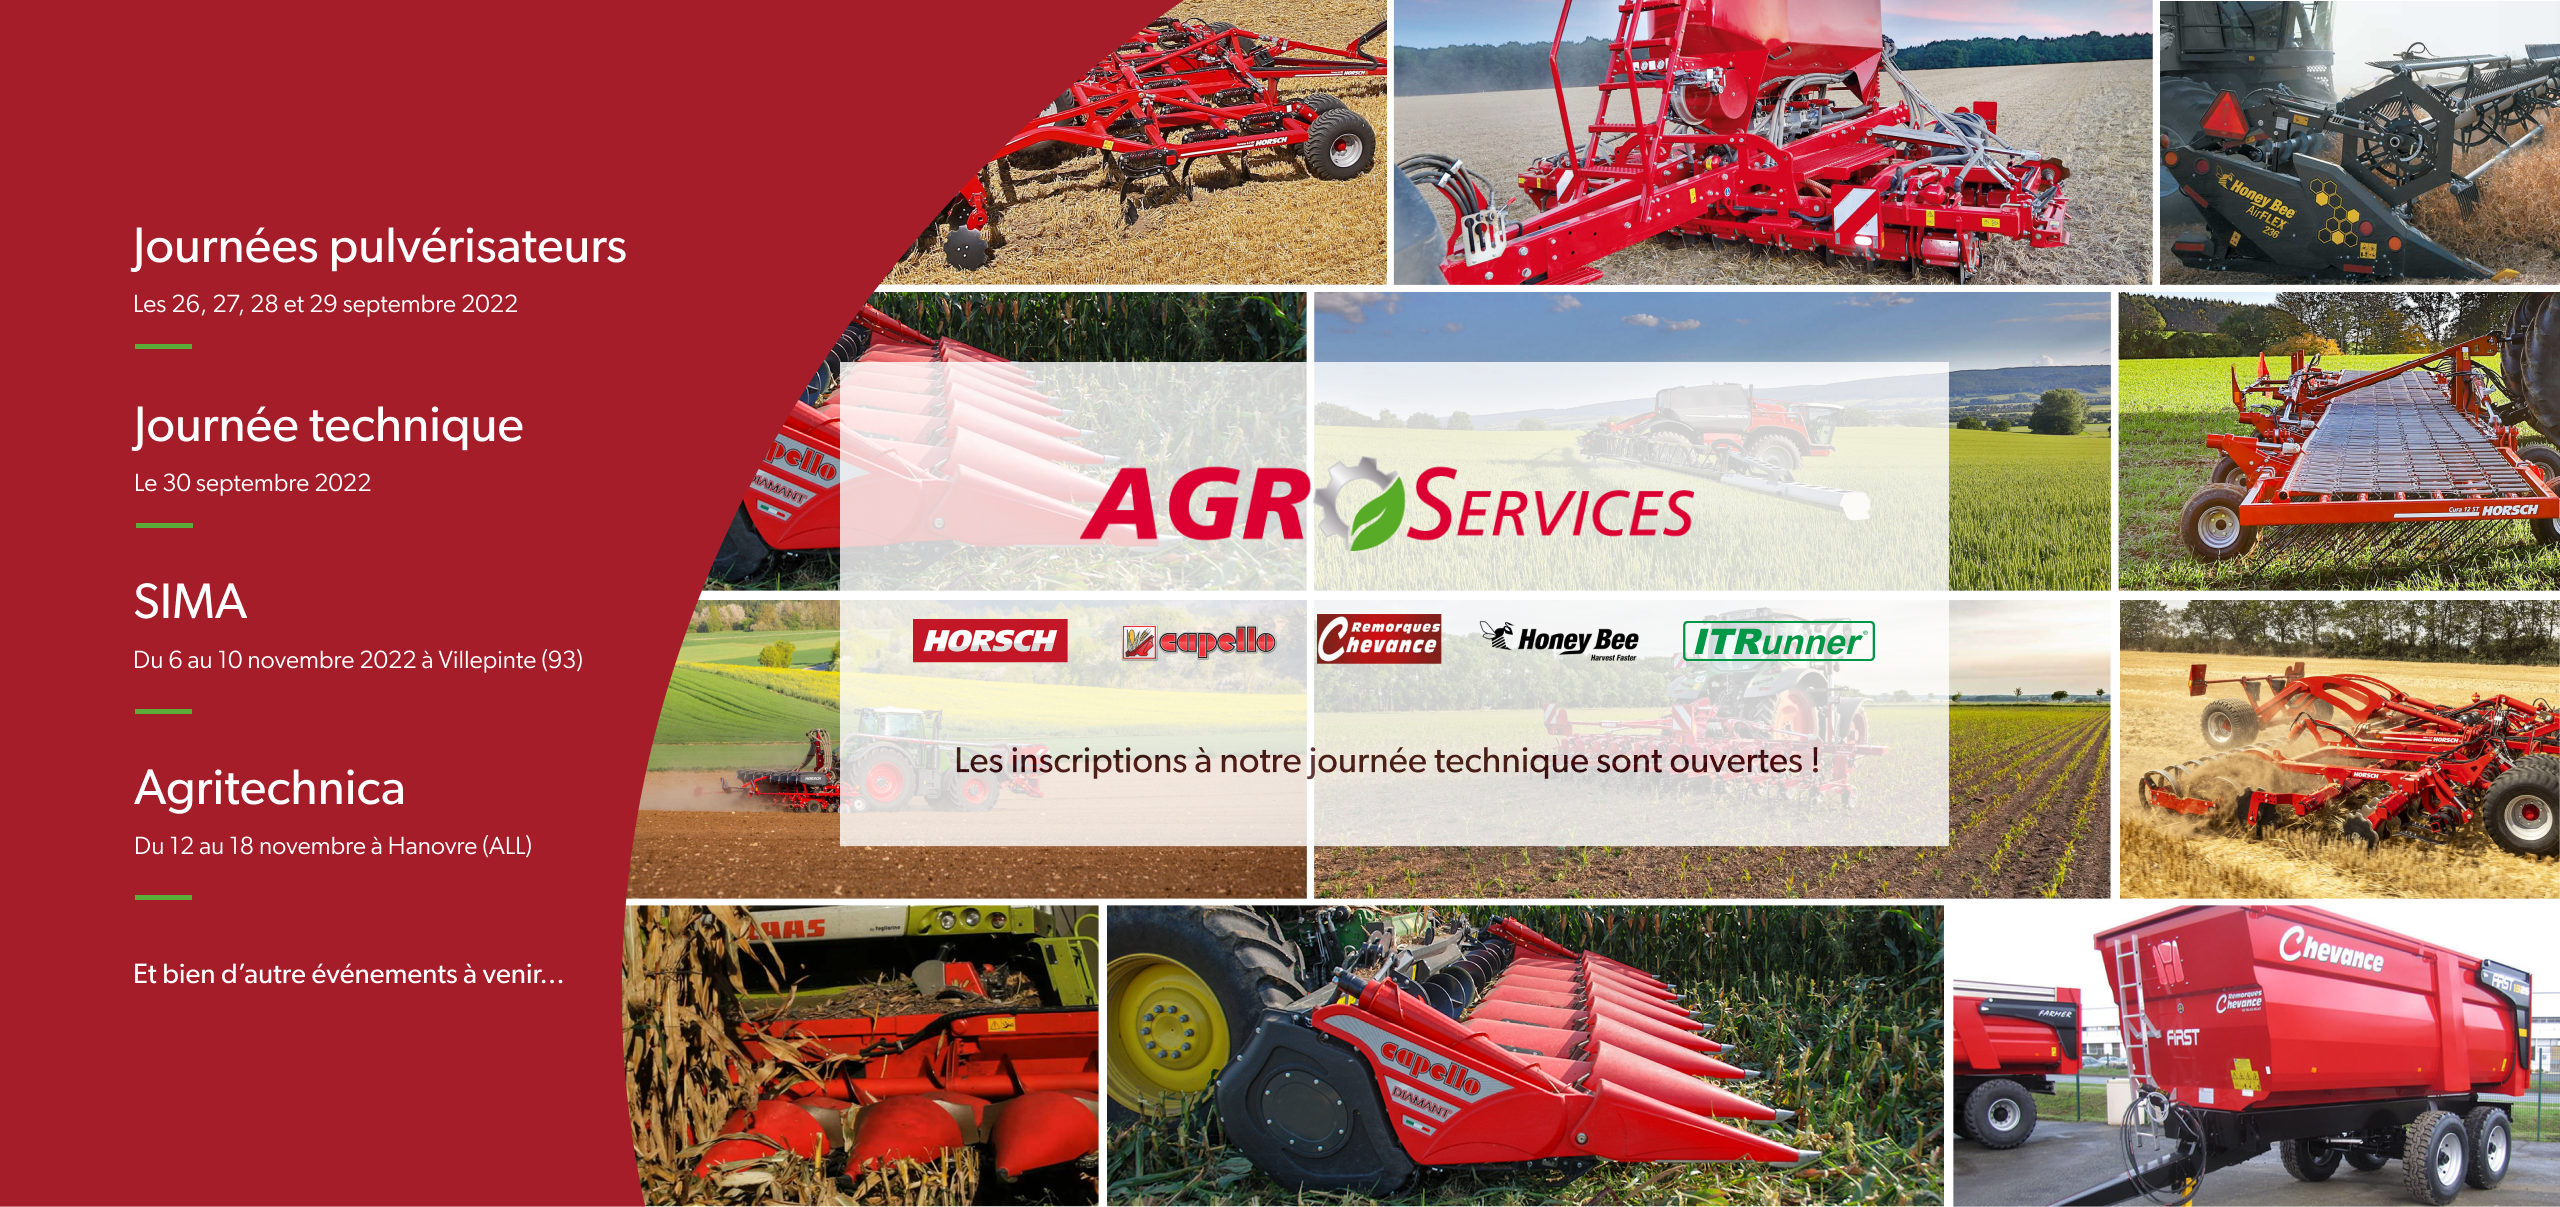 Agro Services